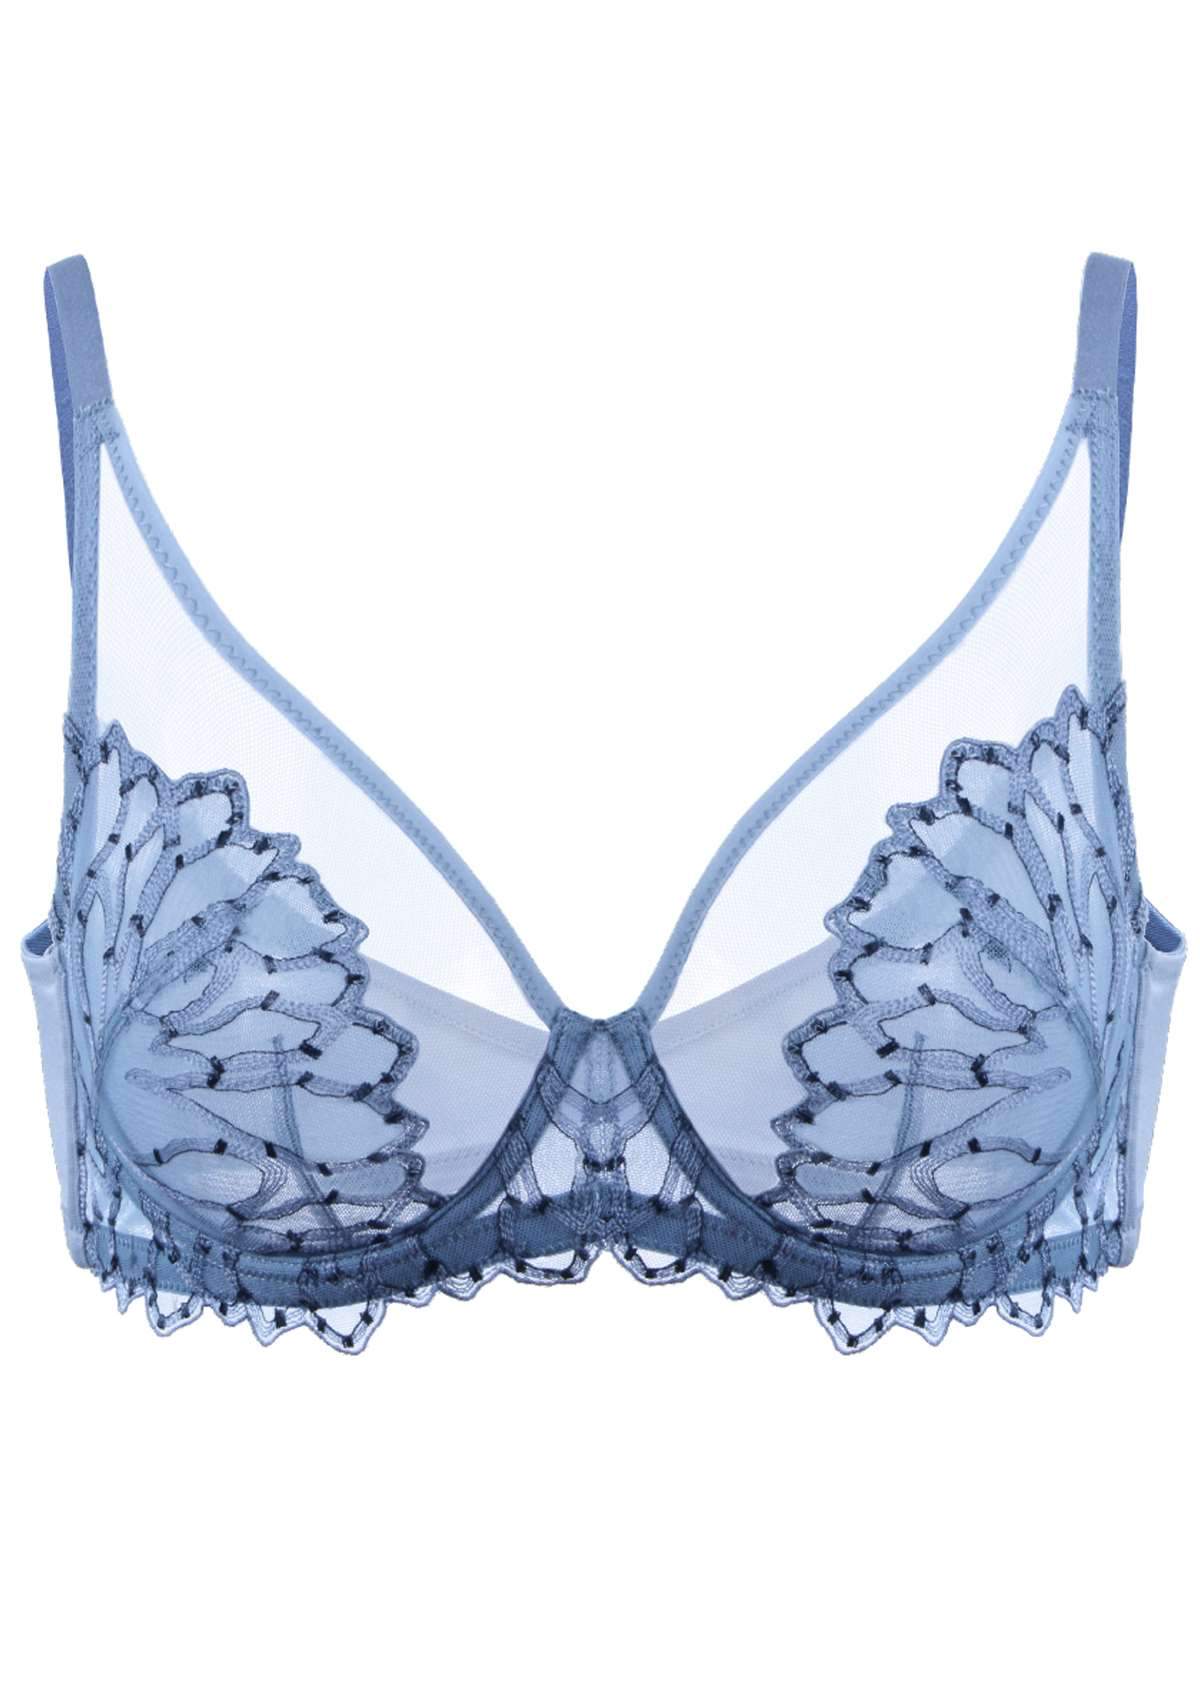 HSIA Chrysanthemum Plus Size Lace Bra: Back Support Bra For Posture - Blue / 32 / C